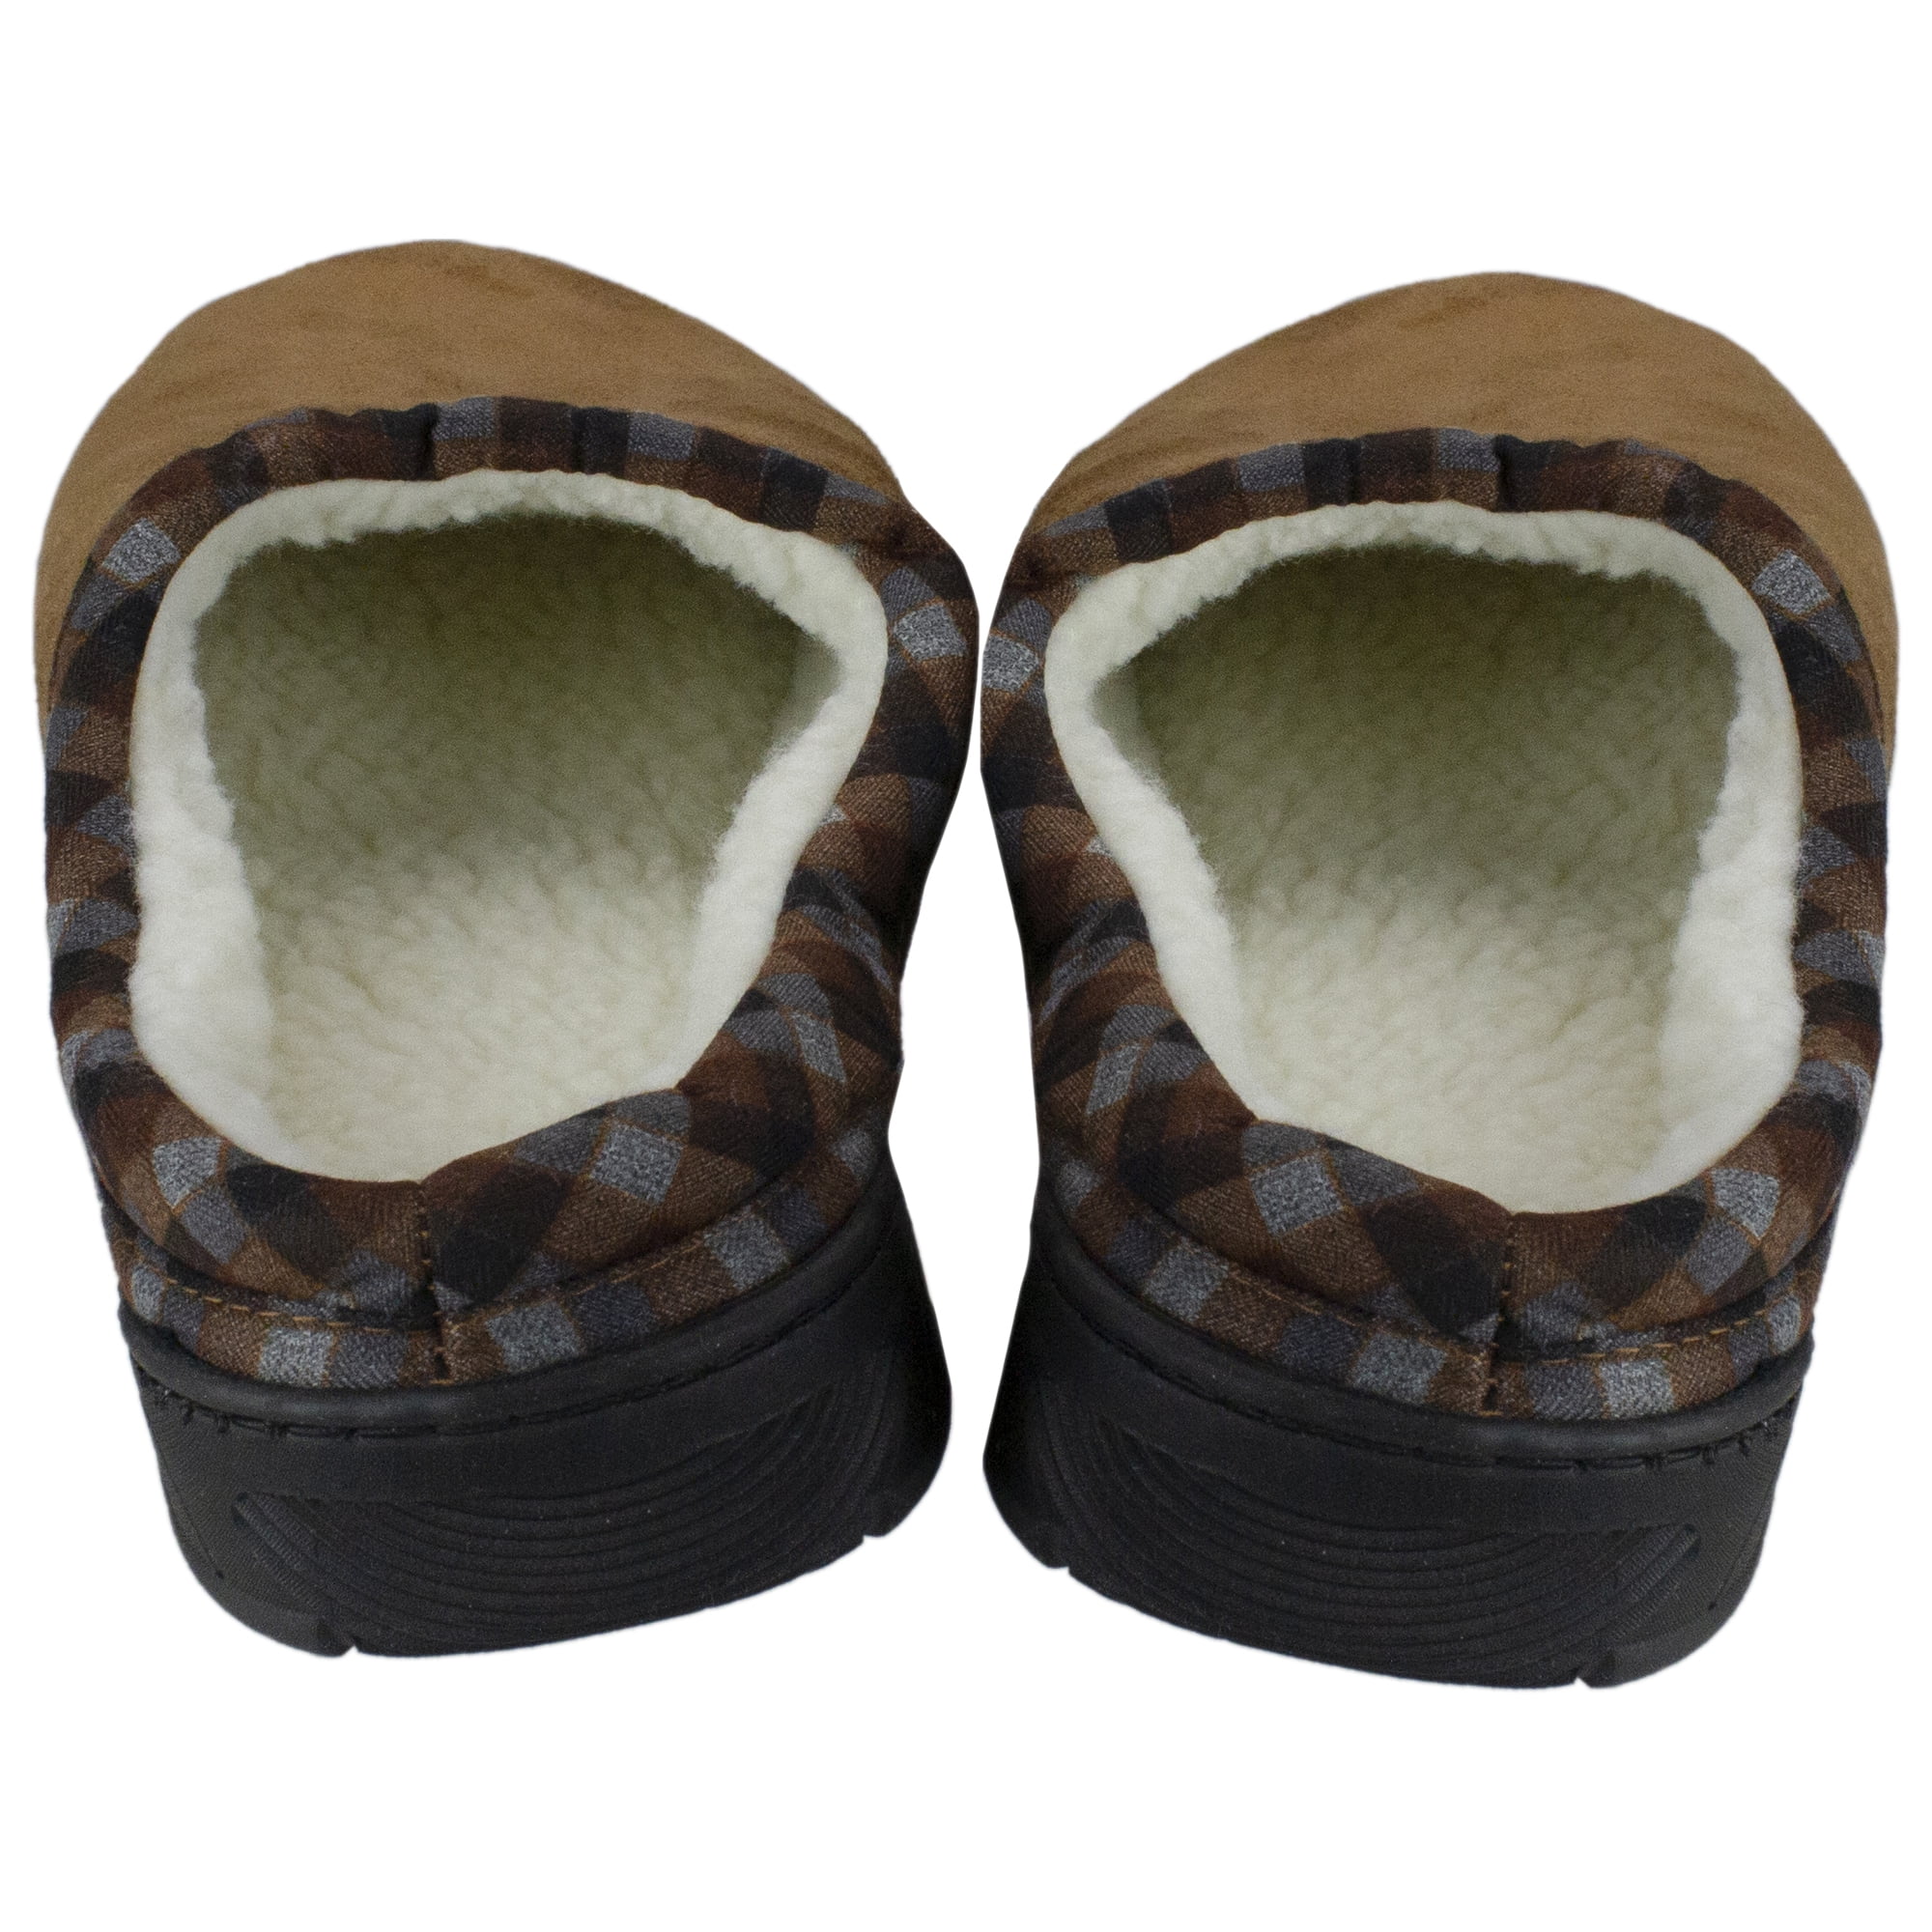 Brown Flossy Style Memory Foam Slippers UK11 Soft & Comfortable With Rubber Sole 